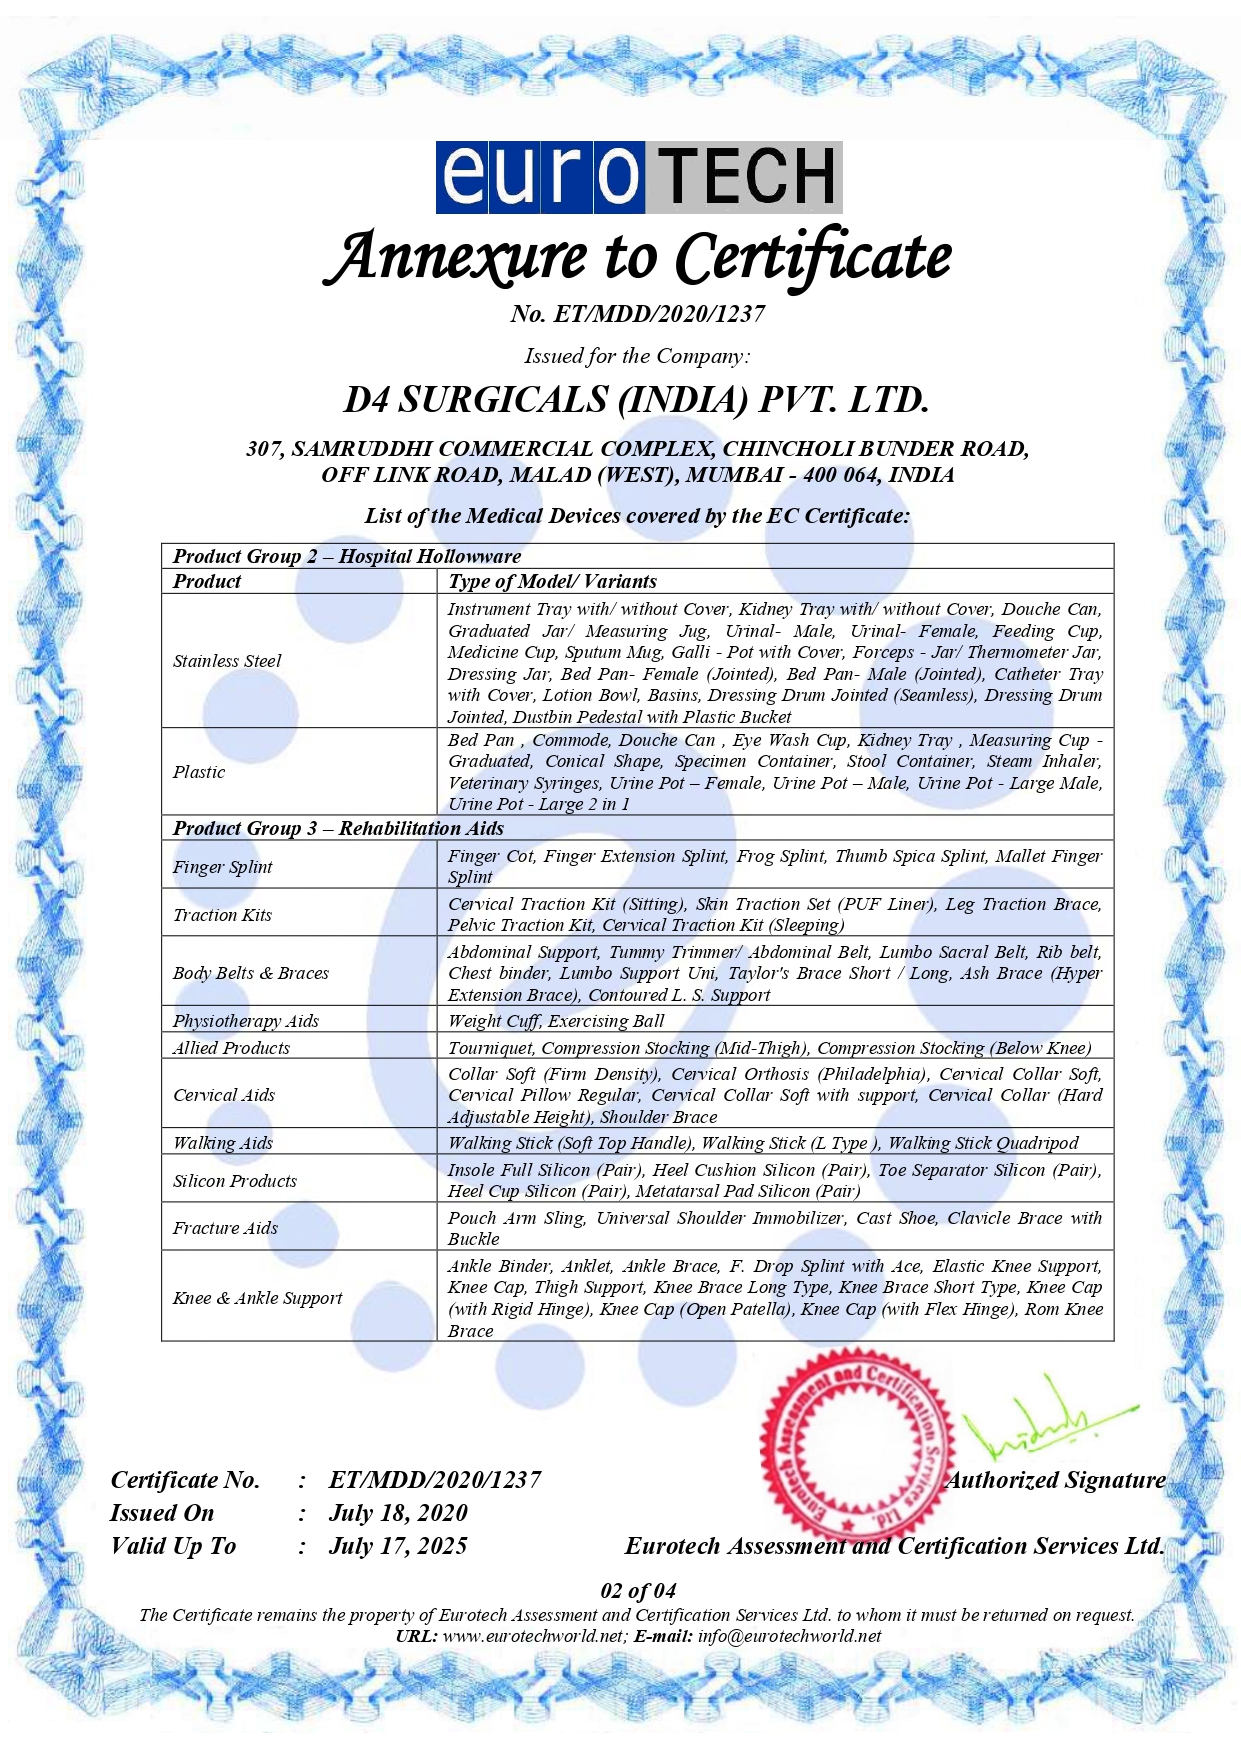 Annexure to certificate 2020-1237 - product grp-2.jpg